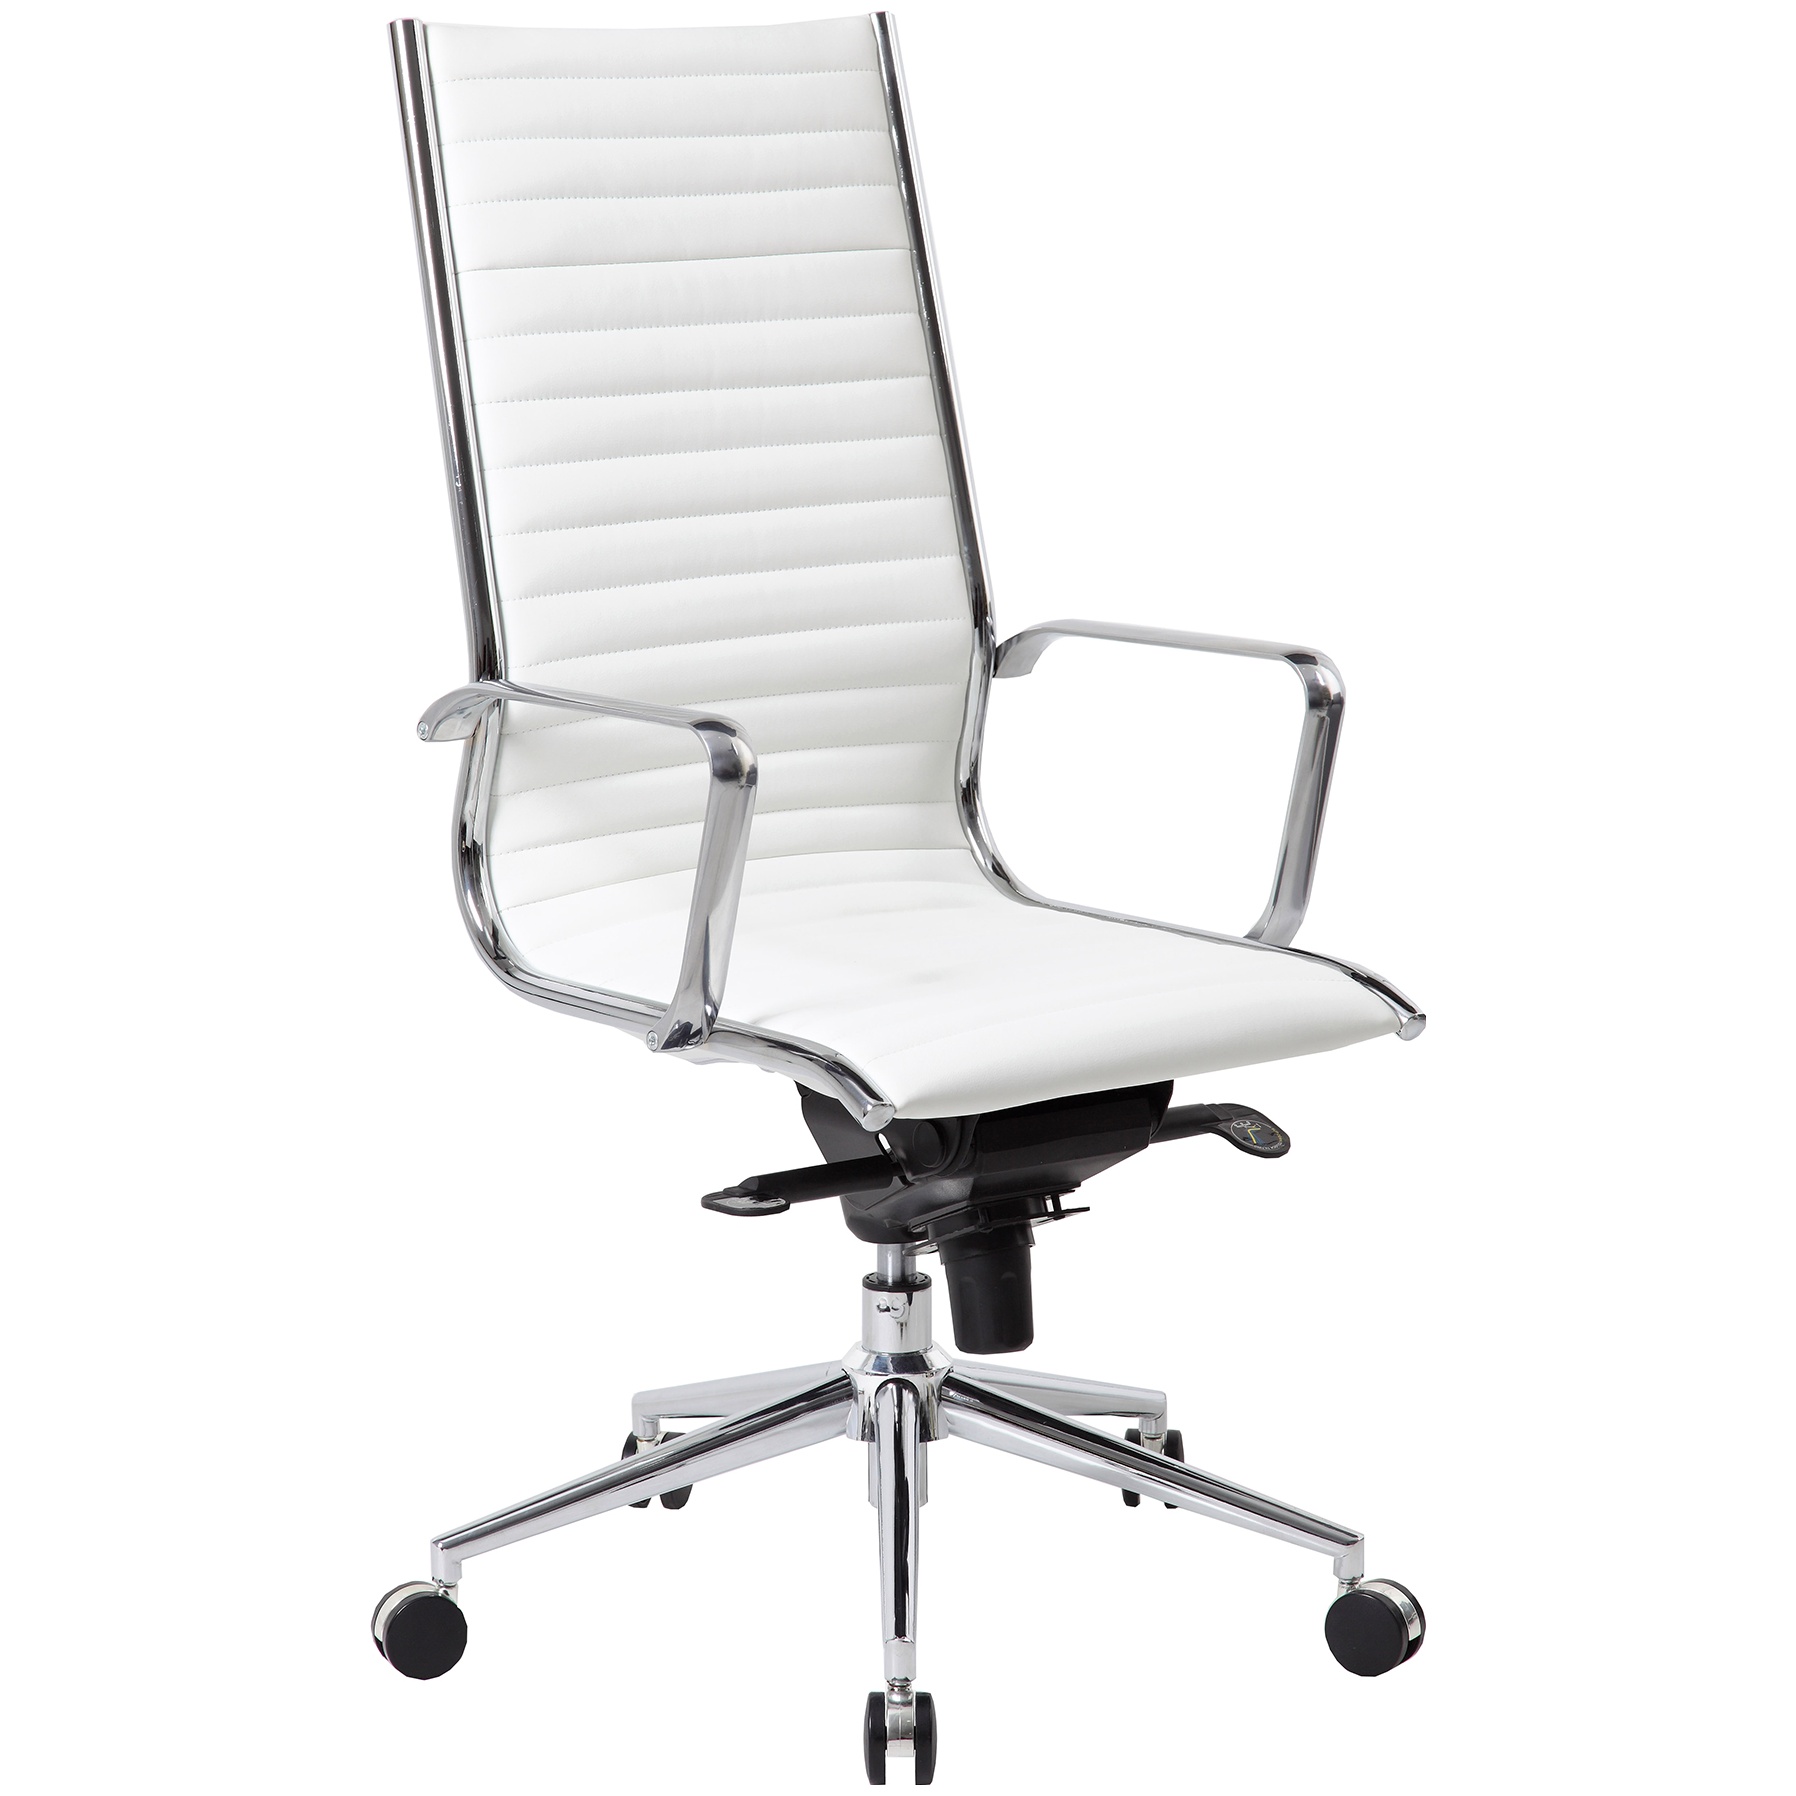 Abbey High Back Leather Office Chairs, White Leather Office Chairs